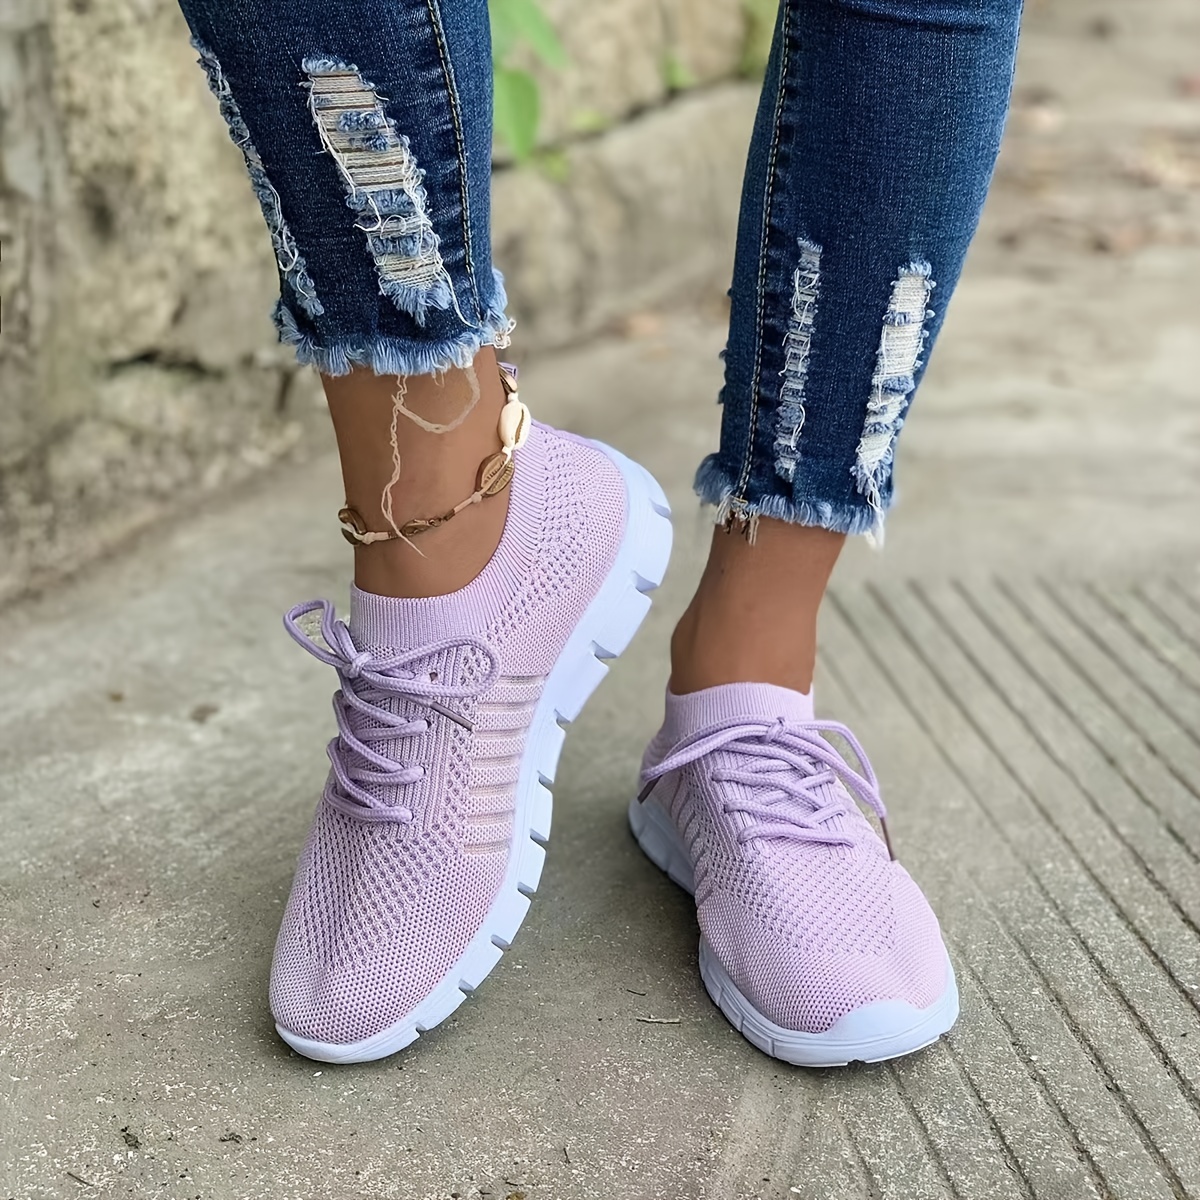 Women's Knitted Sports Shoes, Breathable & Comfortable Low Top Running  Shoes, Casual Tennis Gym Shoes